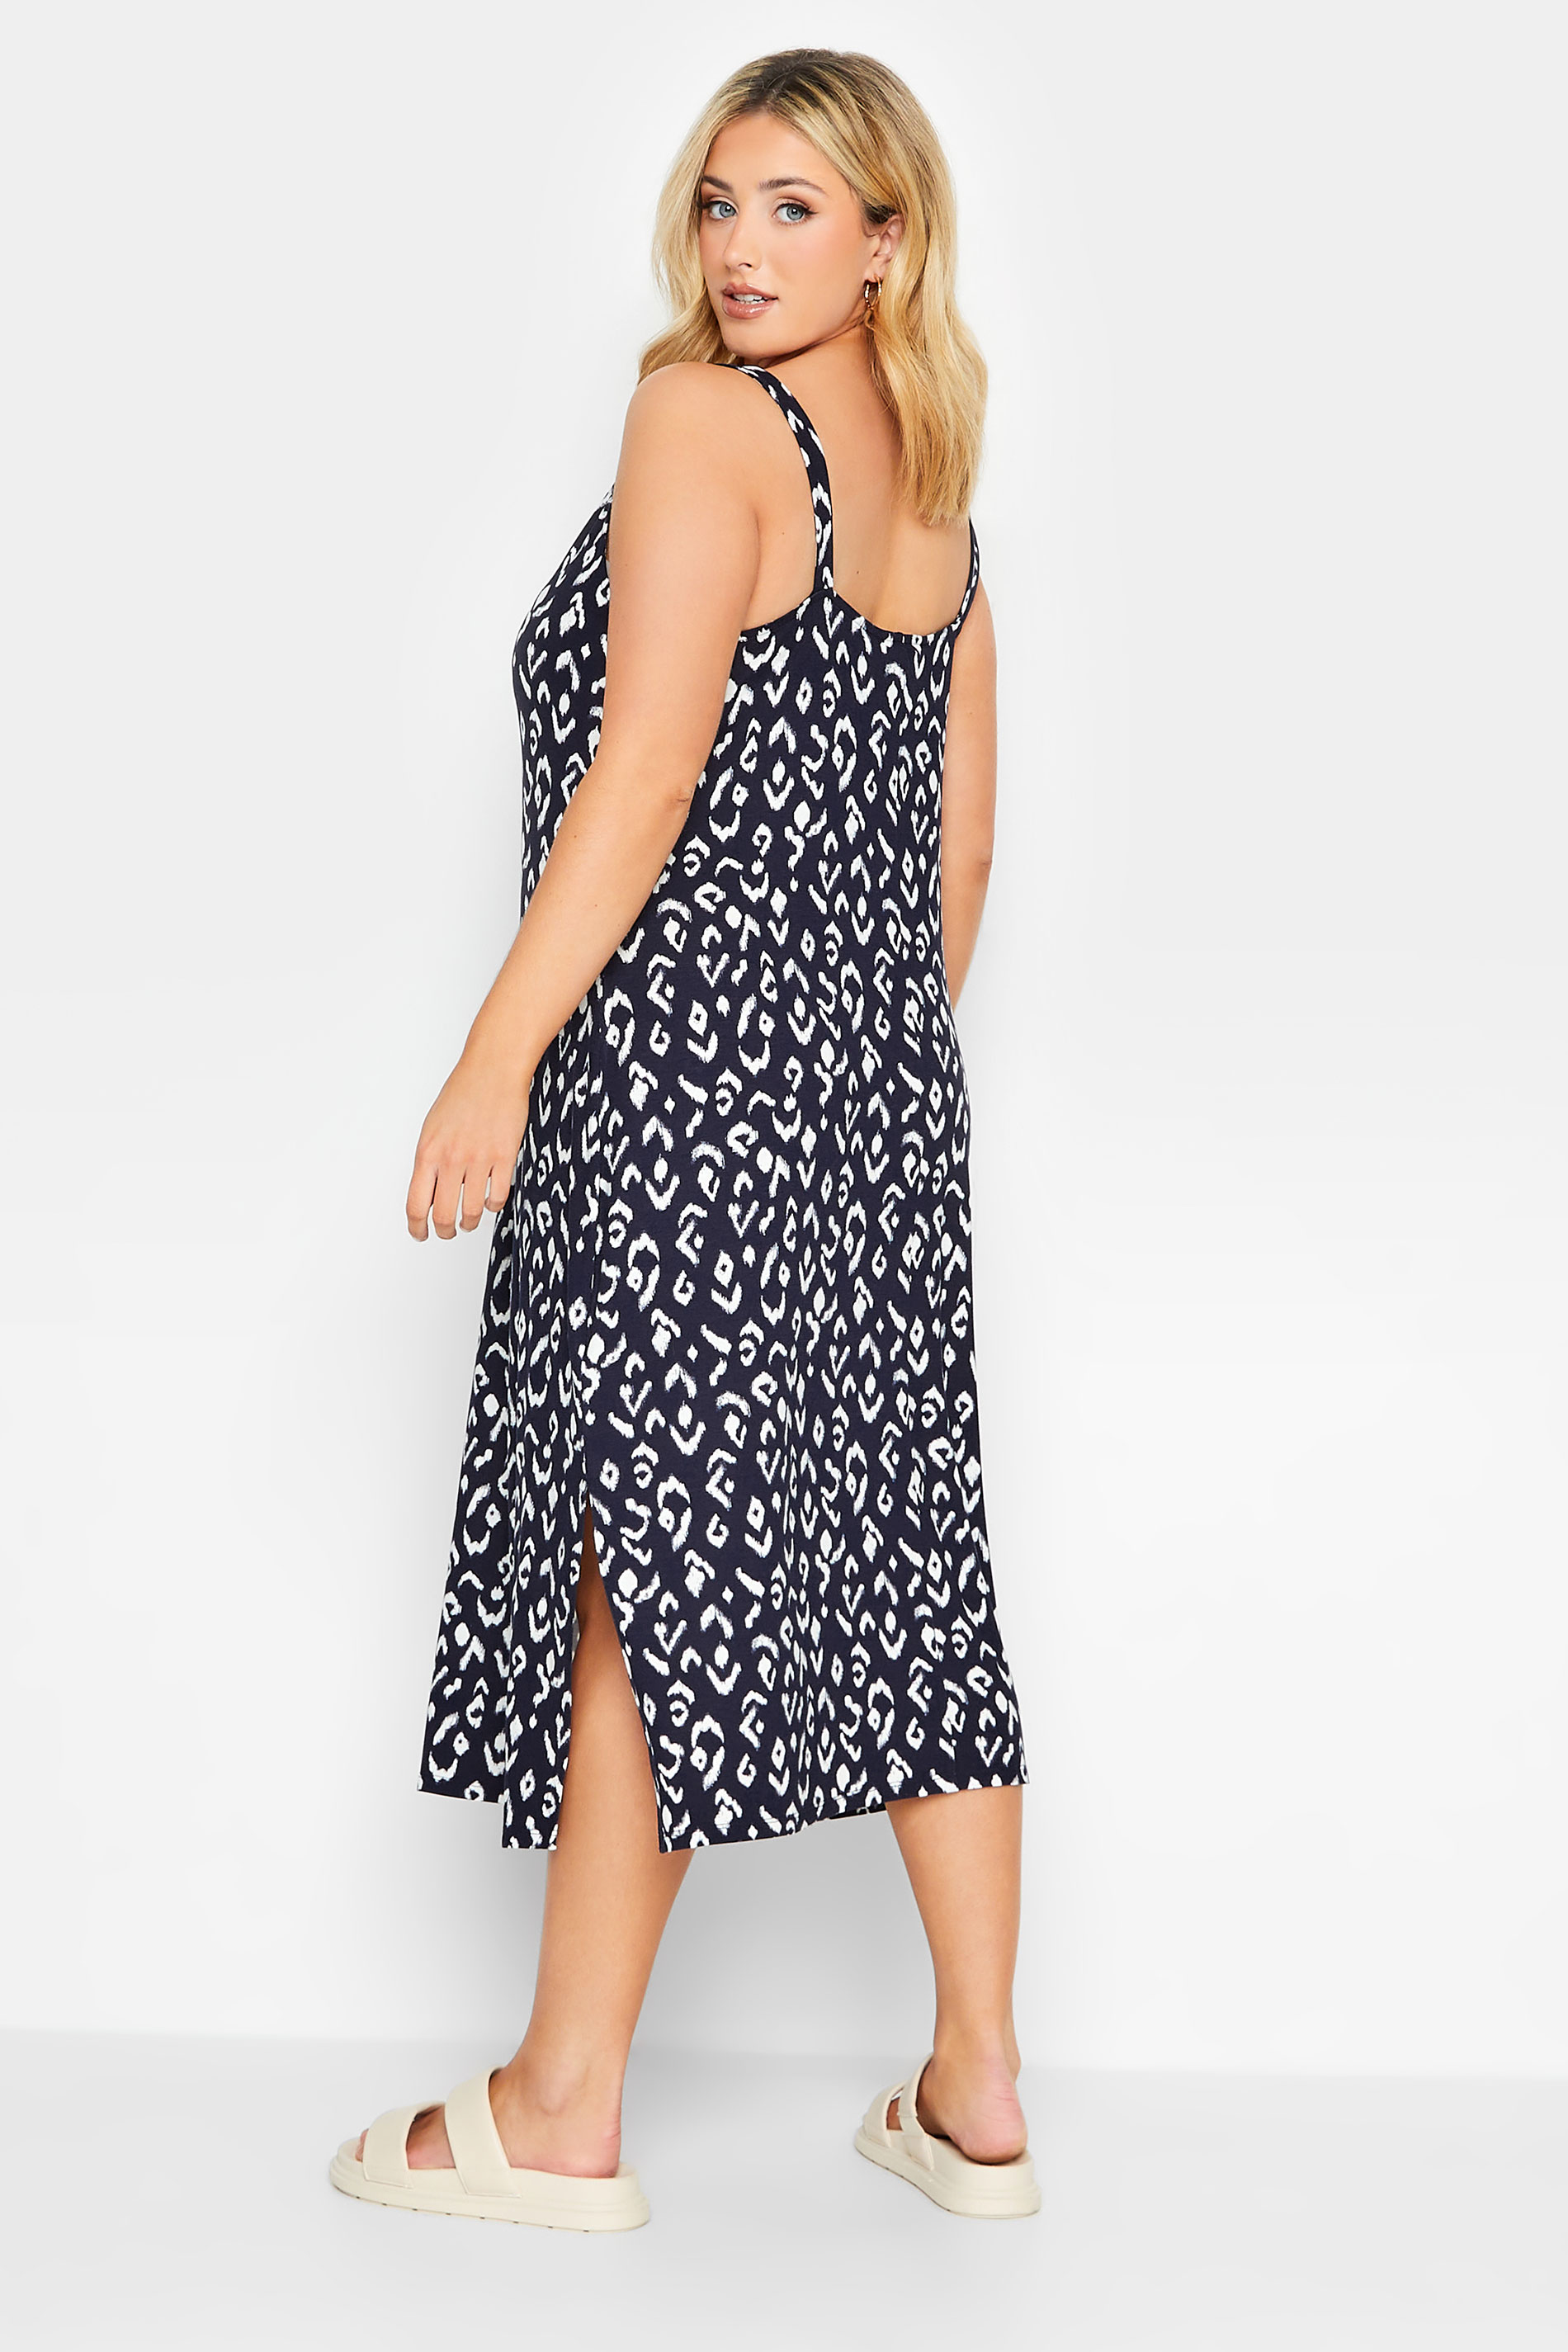 YOURS Plus Size Navy Blue Ikat Print Beach Dress | Yours Clothing 3